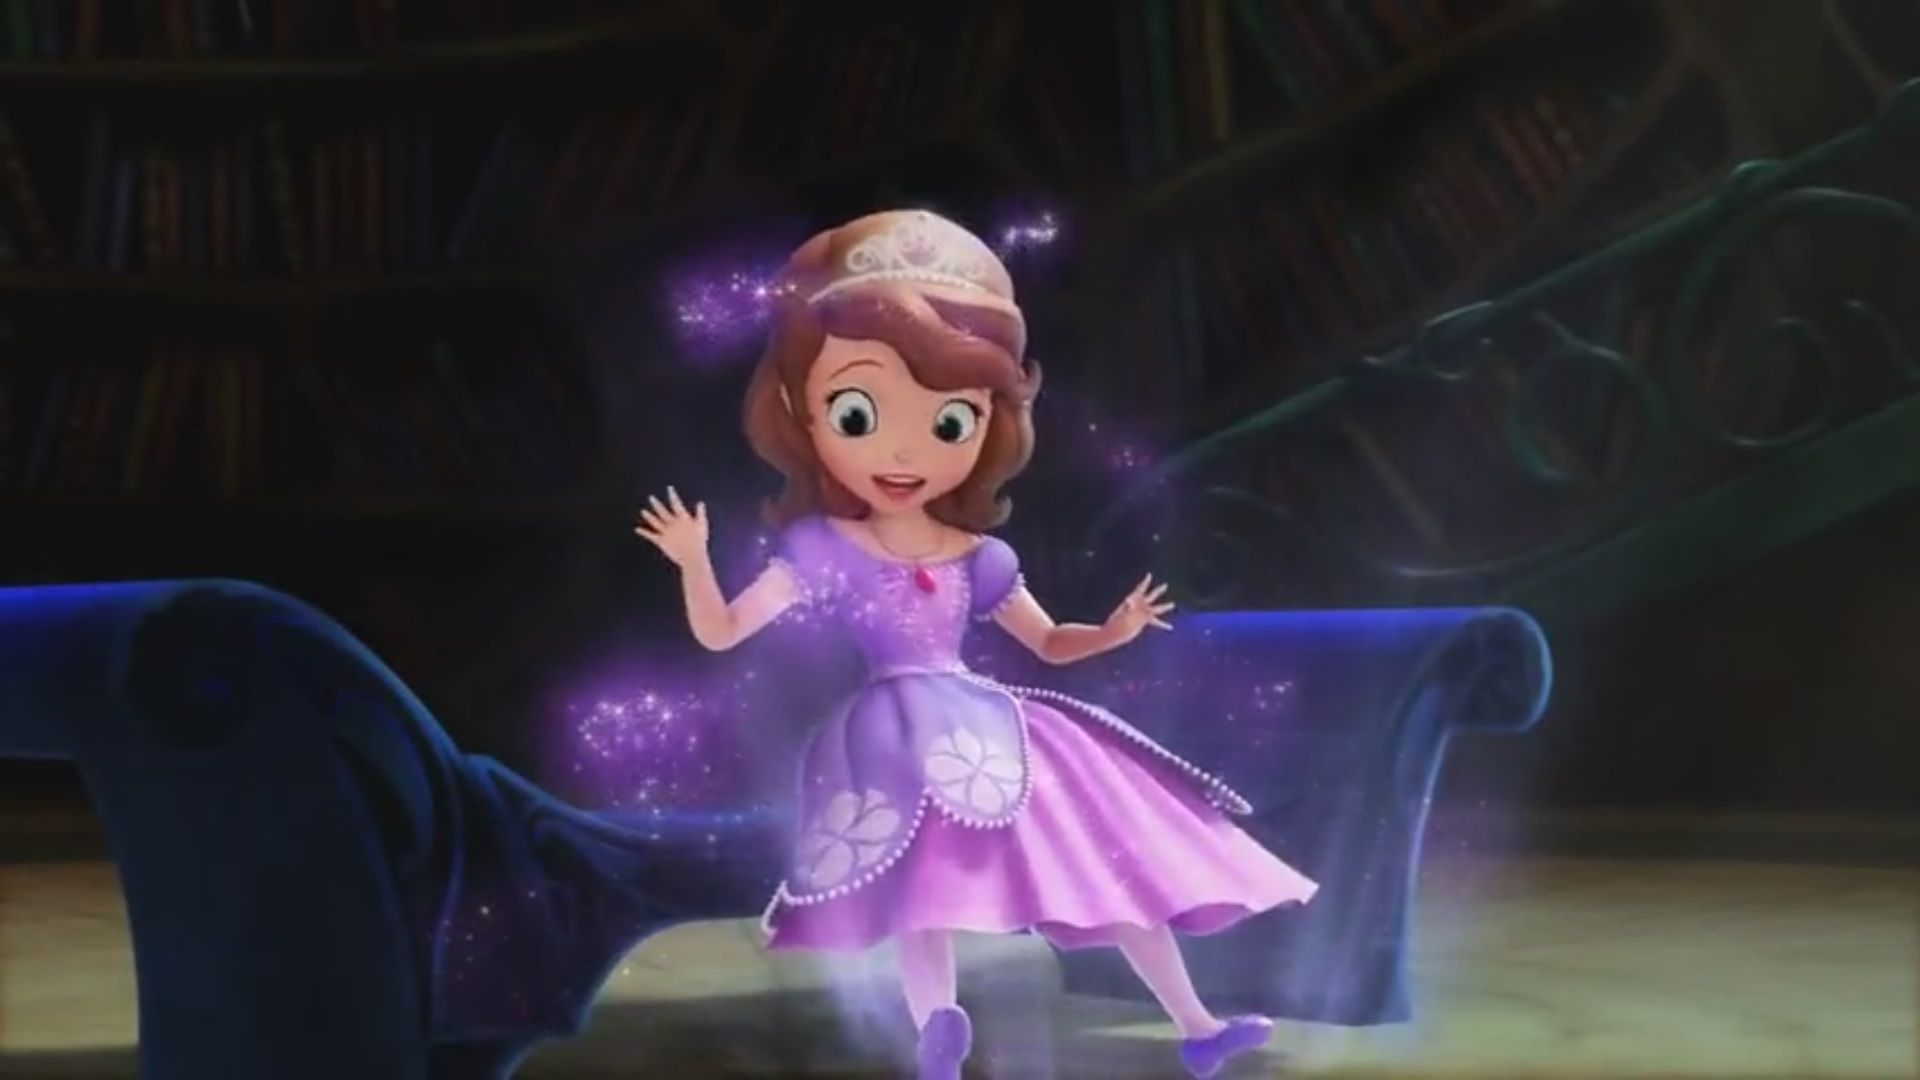 Sofia the First (character)/Gallery. Elena of Avalor